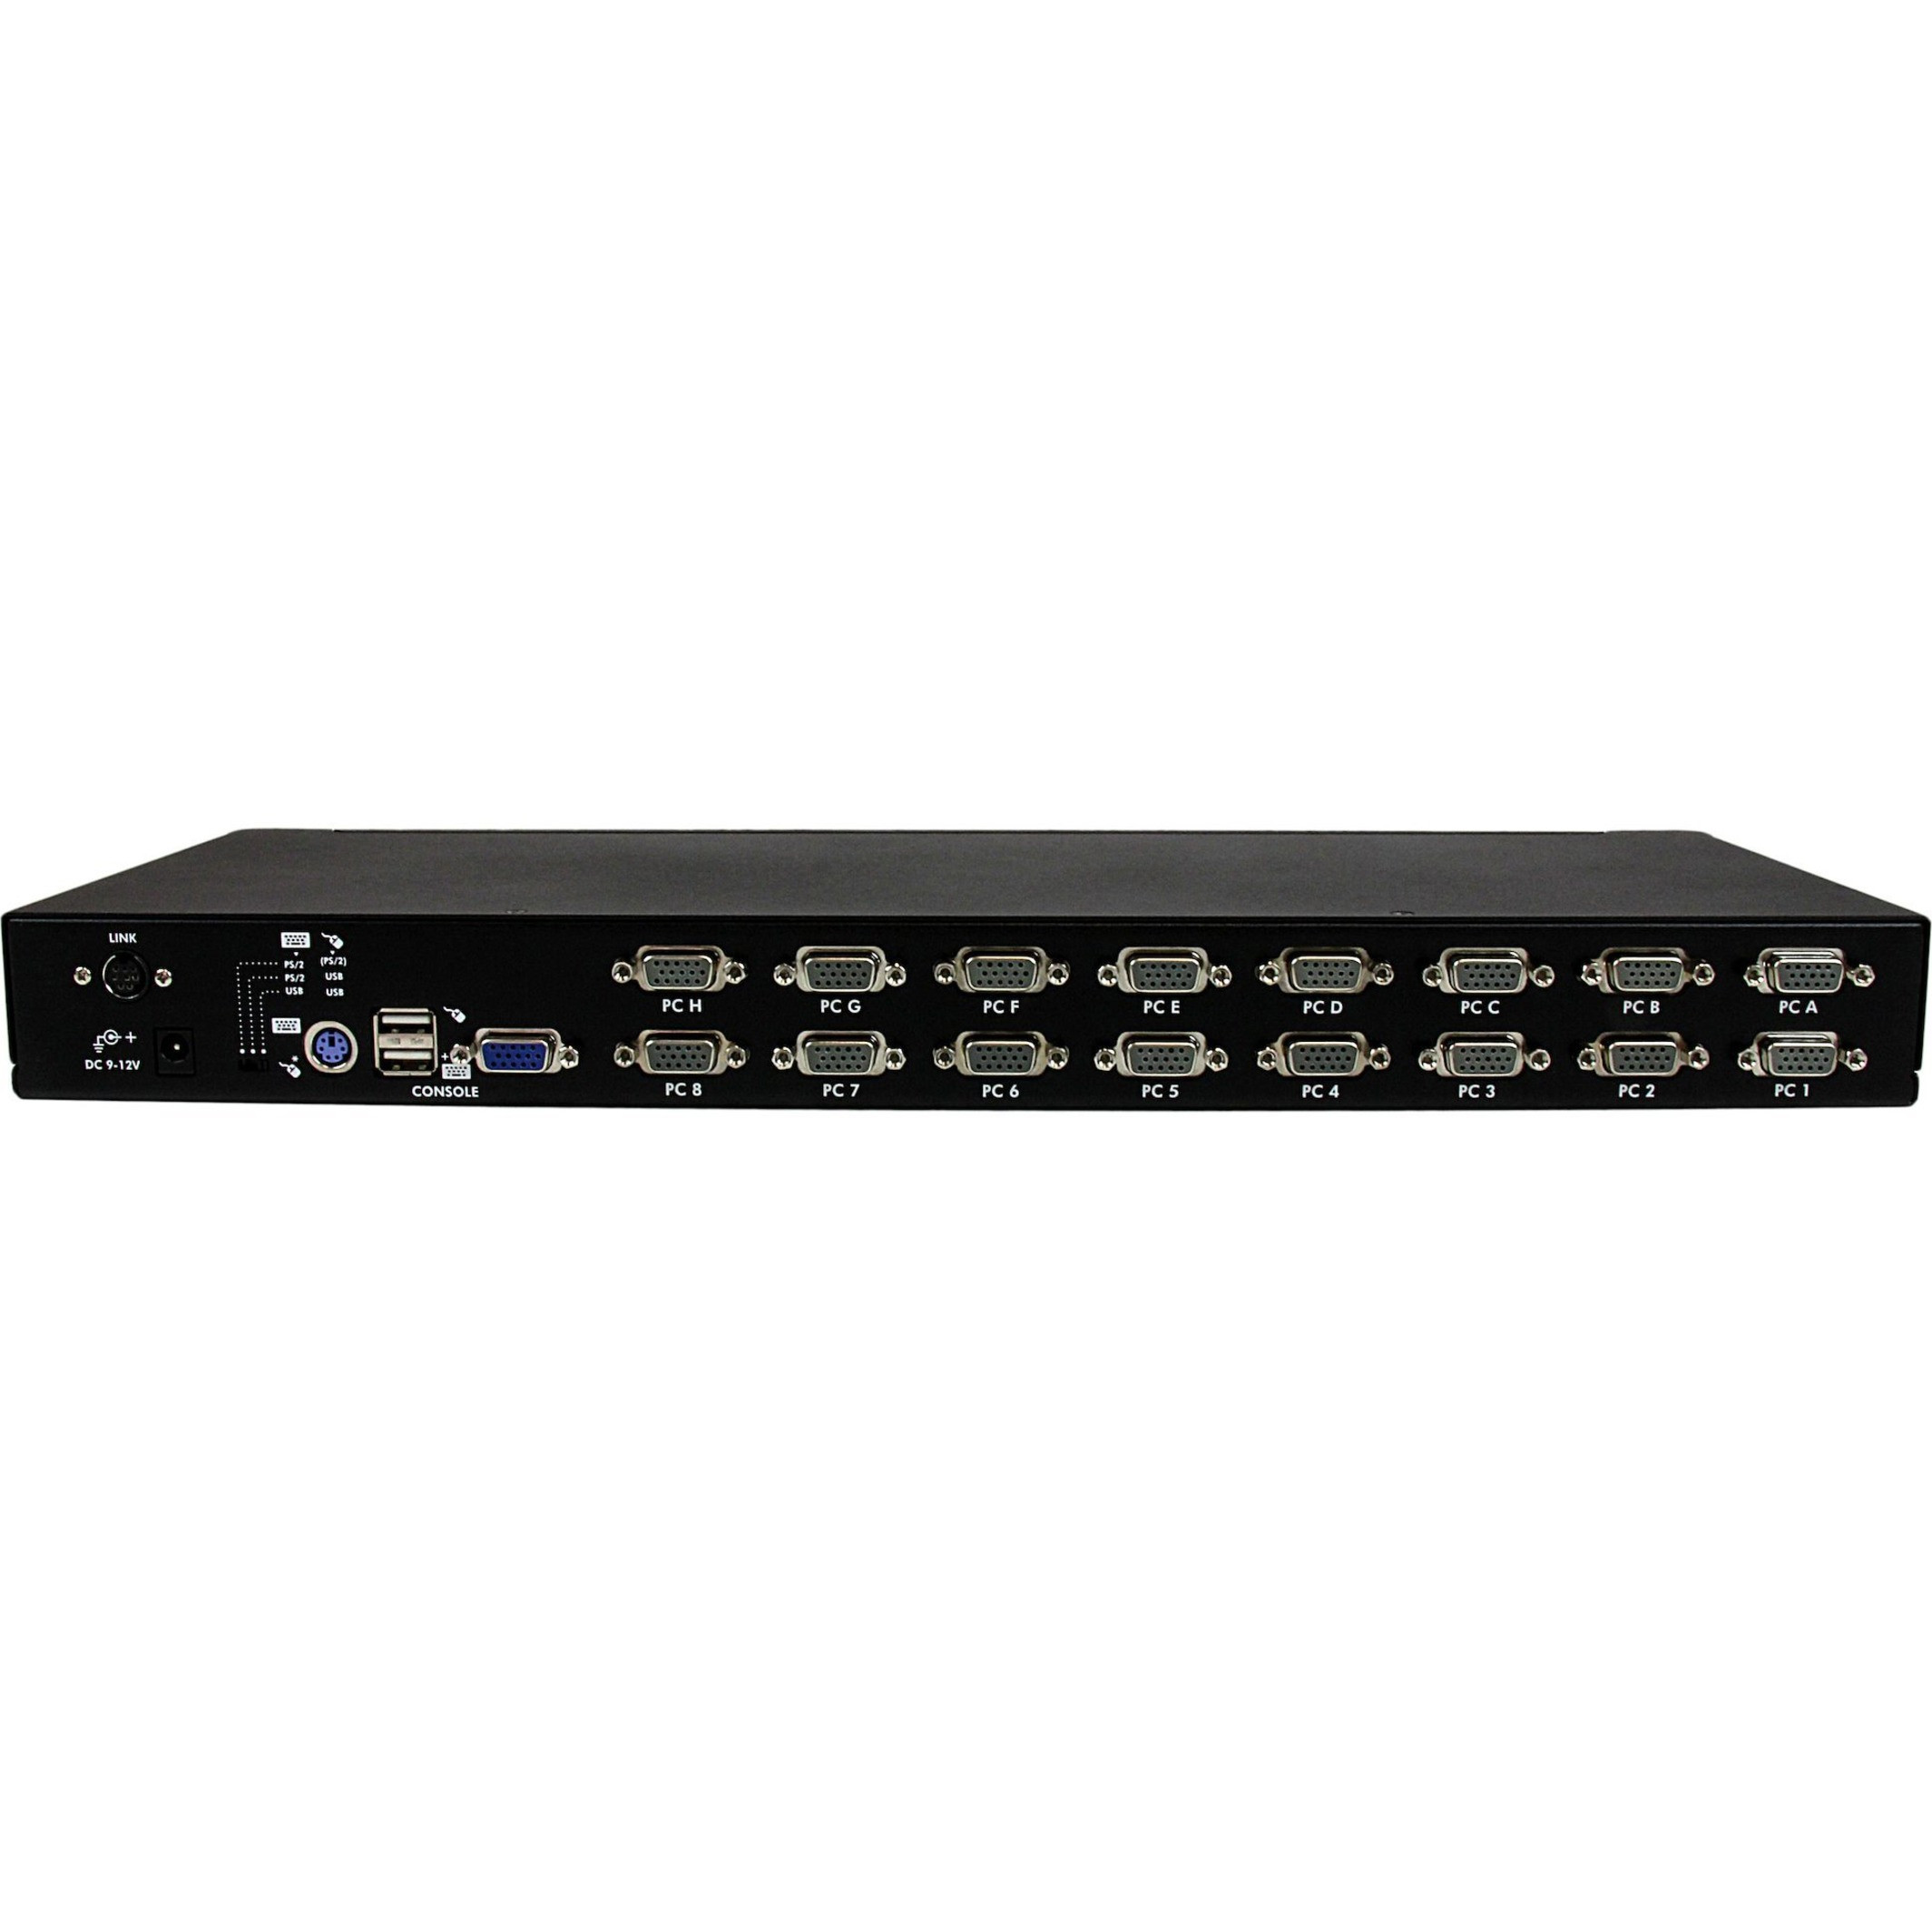 Startech .com 16 Port 1U Rackmount USB PS/2 KVM Switch with OSDControl up to 16 USB or PS/2-connected computers from one keyboard, mouse an… SV1631DUSB